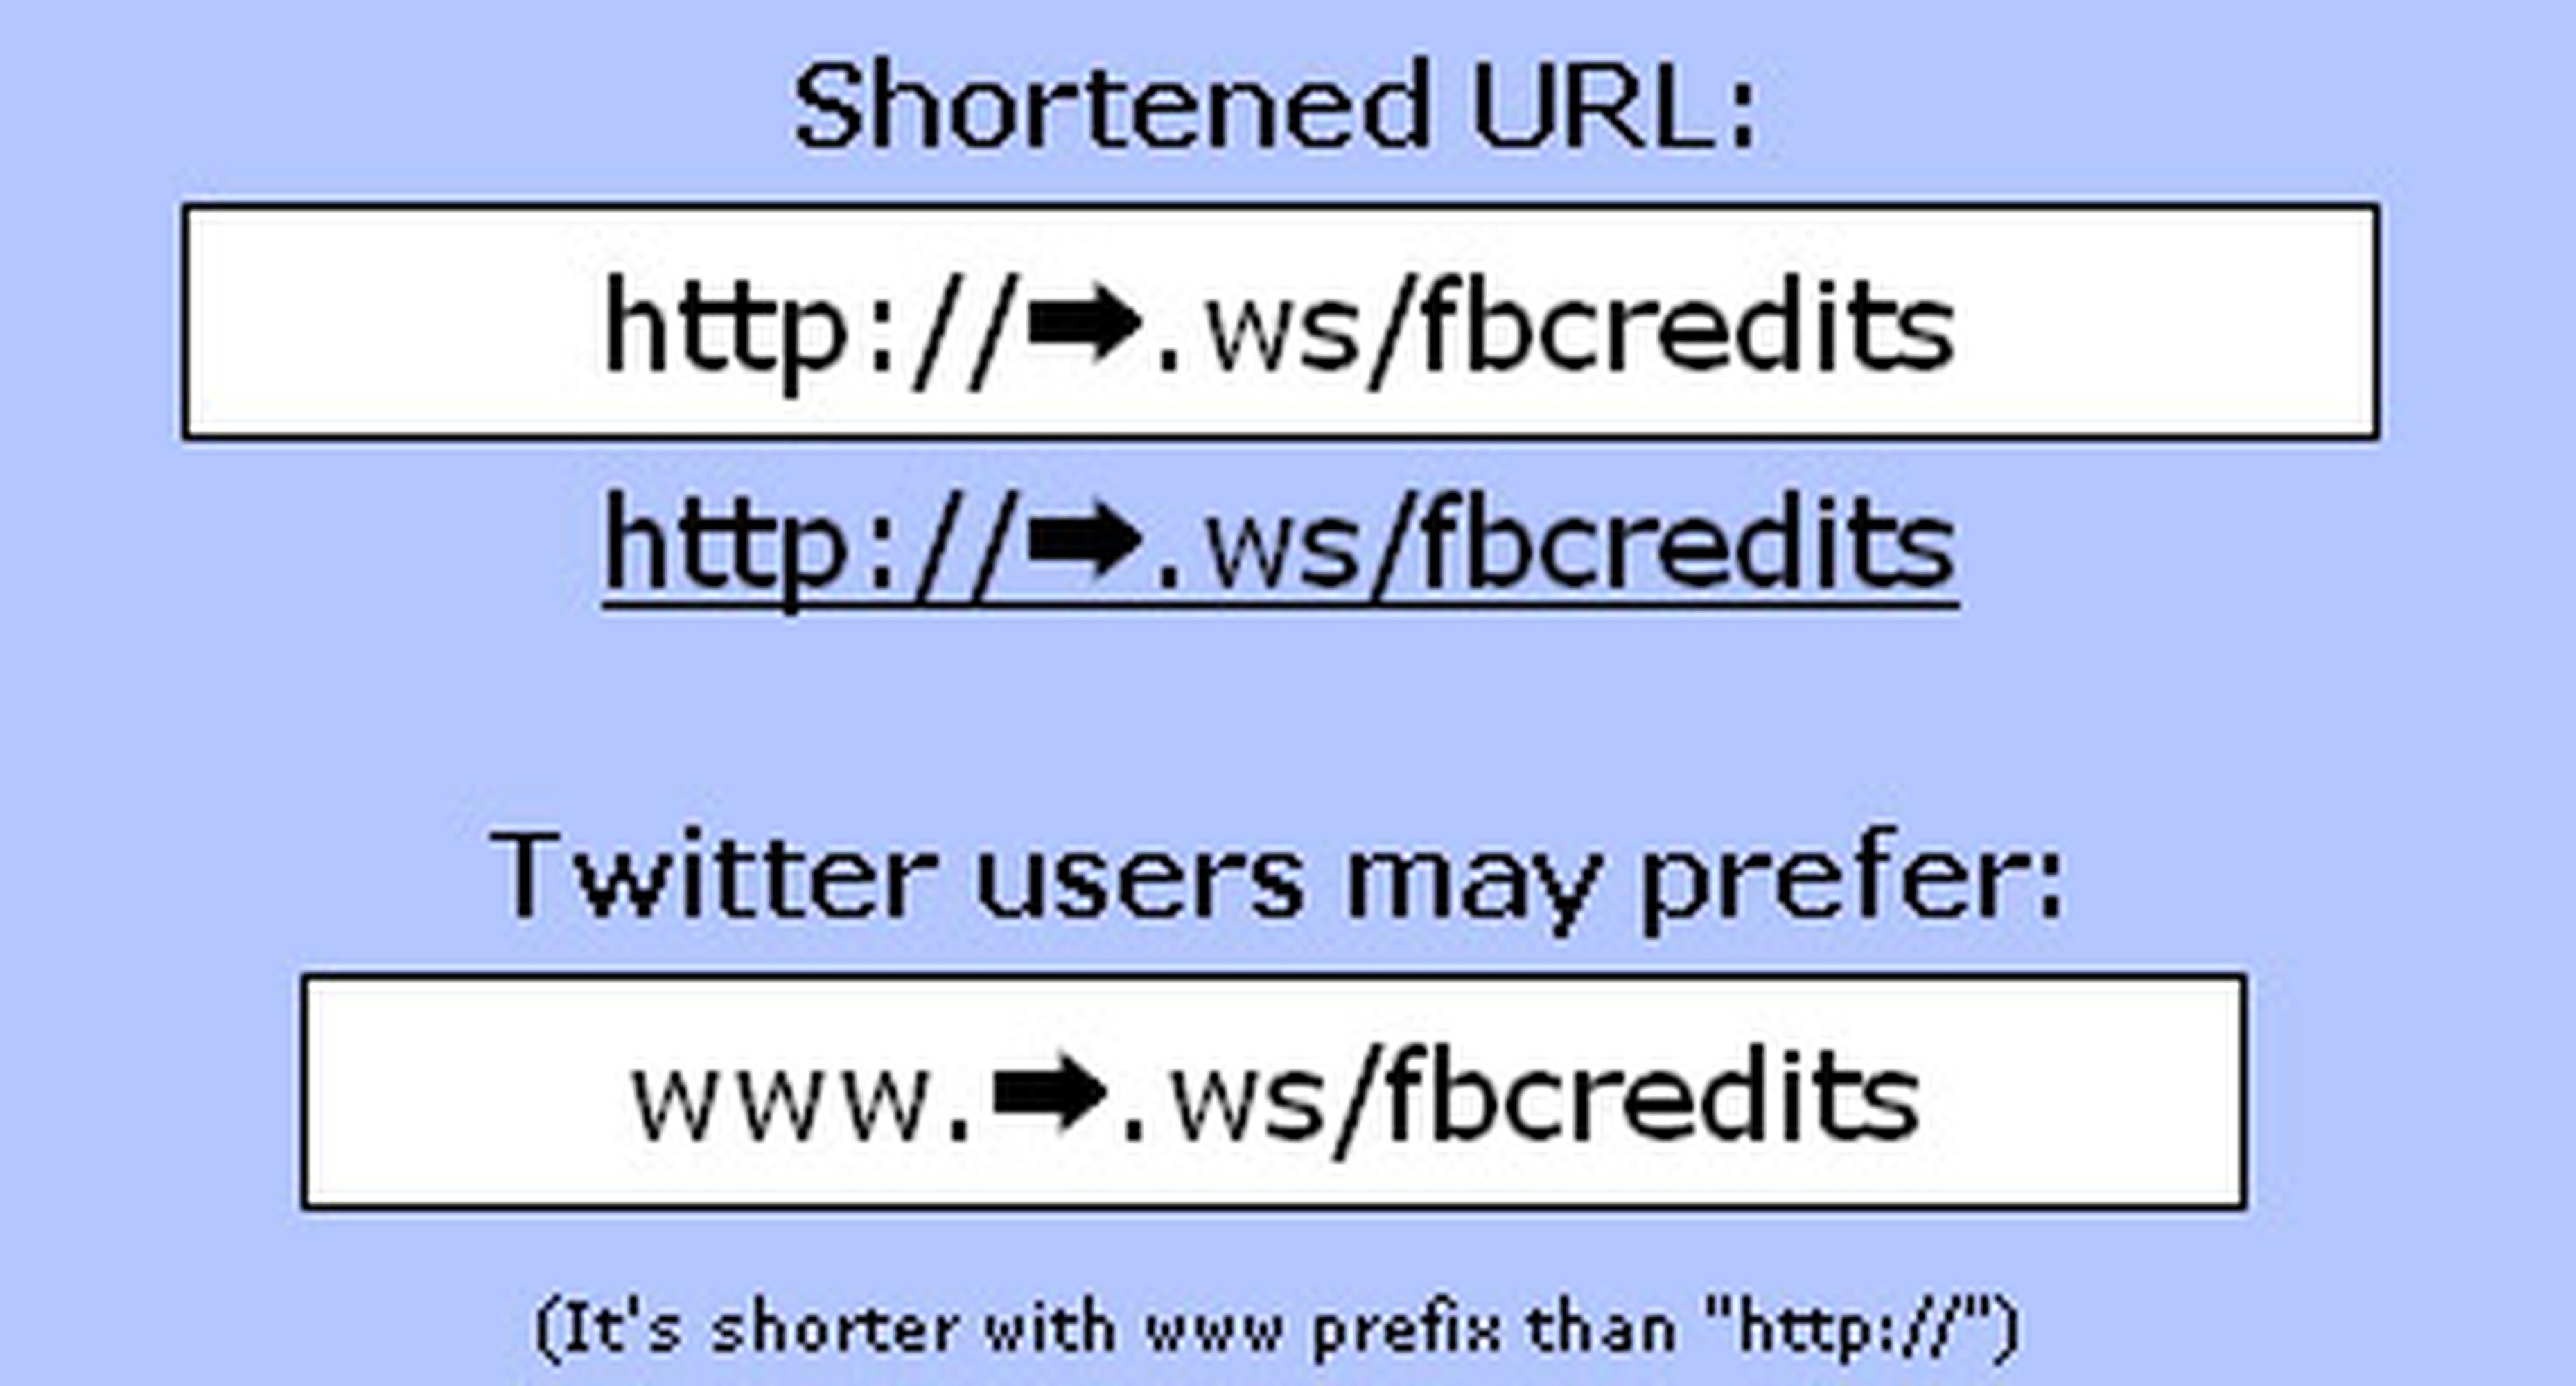 5 Reasons Why URL Shorteners Are Useful